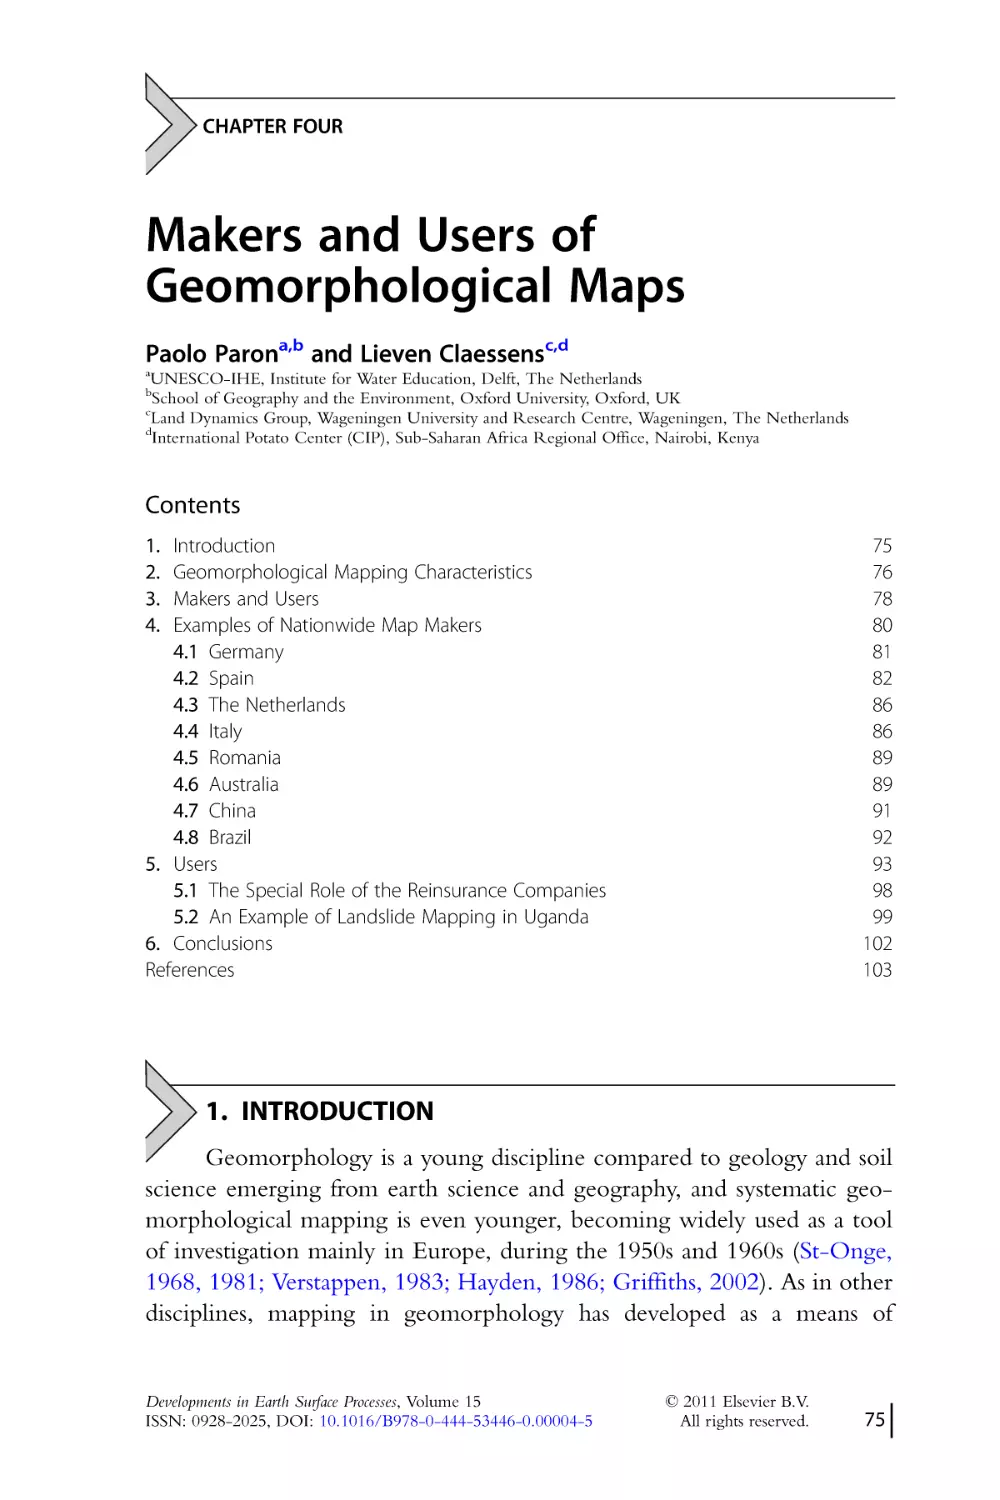 CHAPTER FOUR. Makers and Users of Geomorphological Maps
1. Introduction